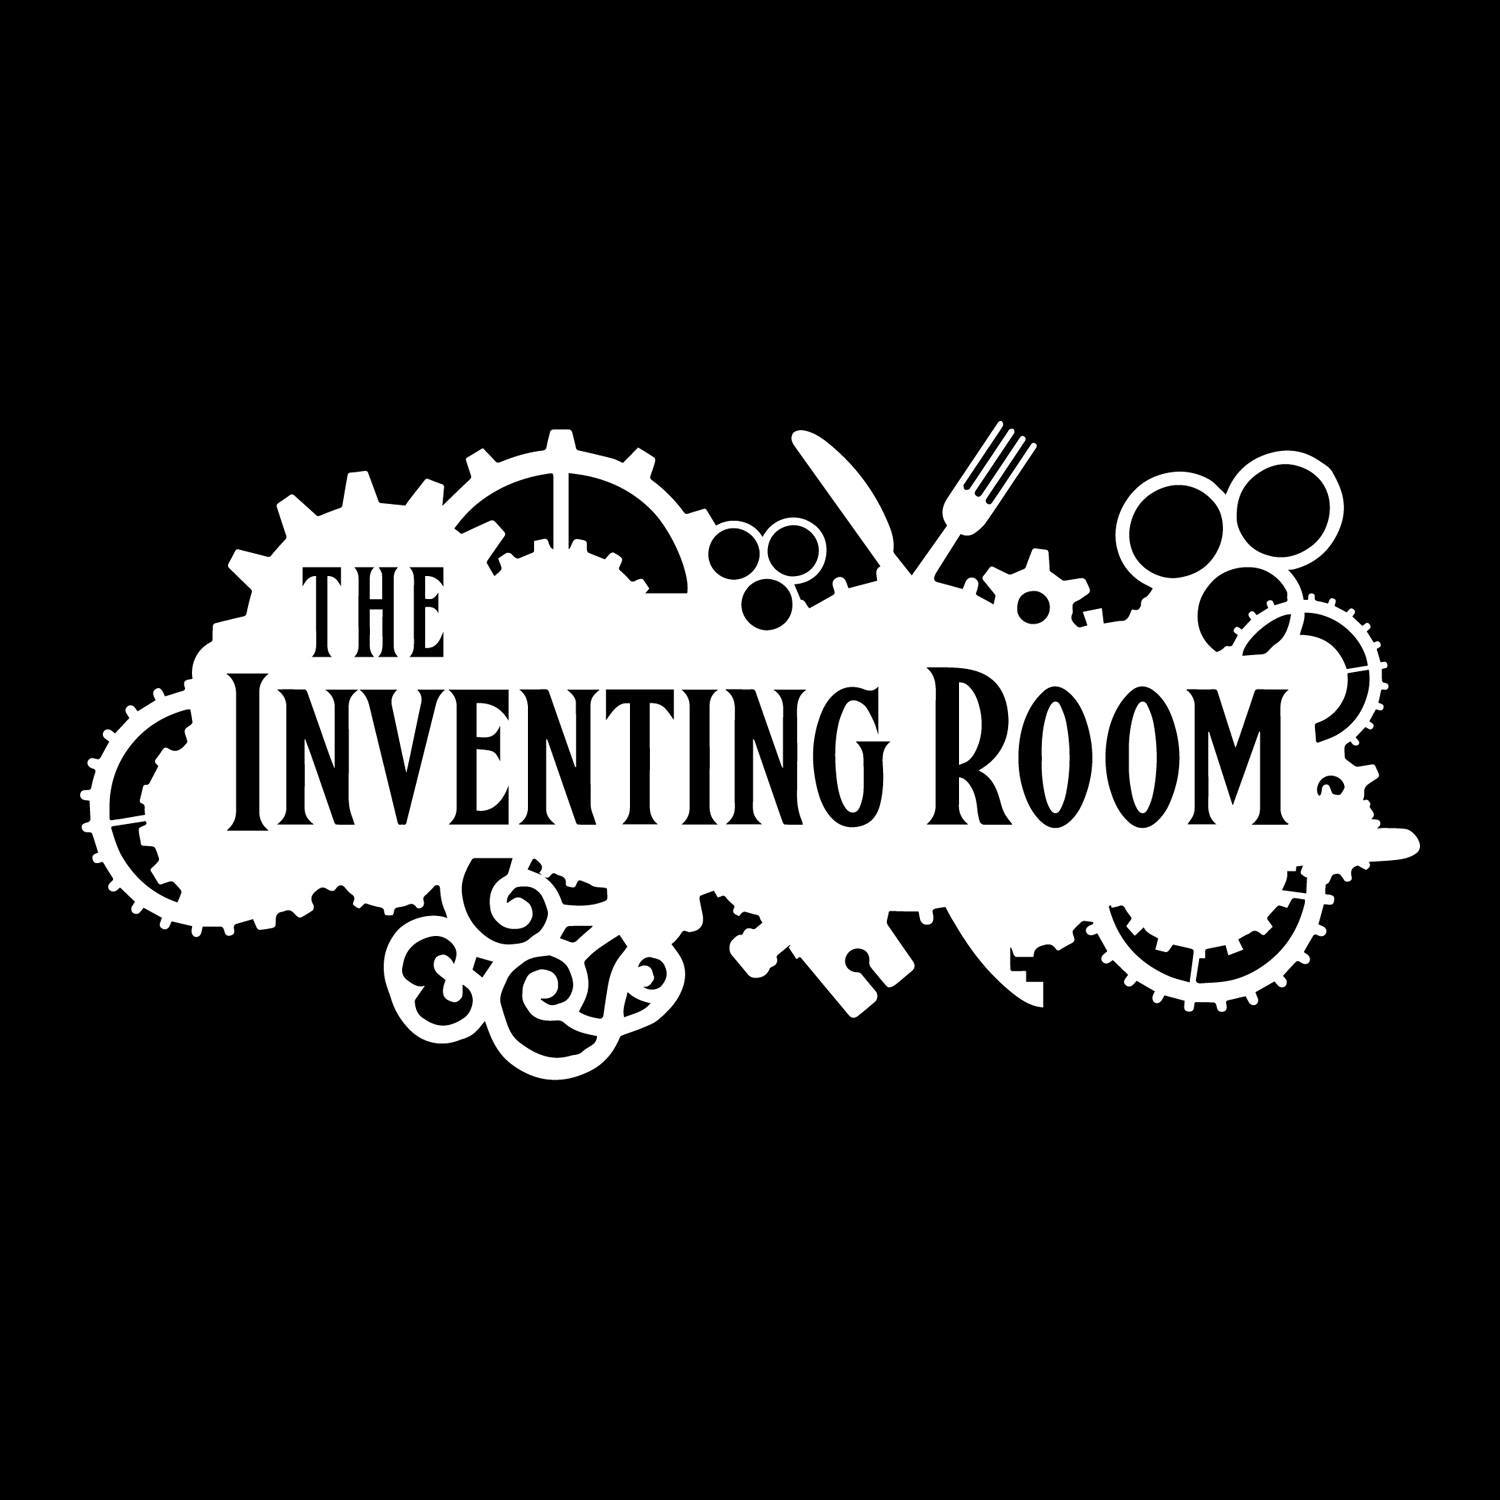 The Inventing Room - Coming Soon in UAE